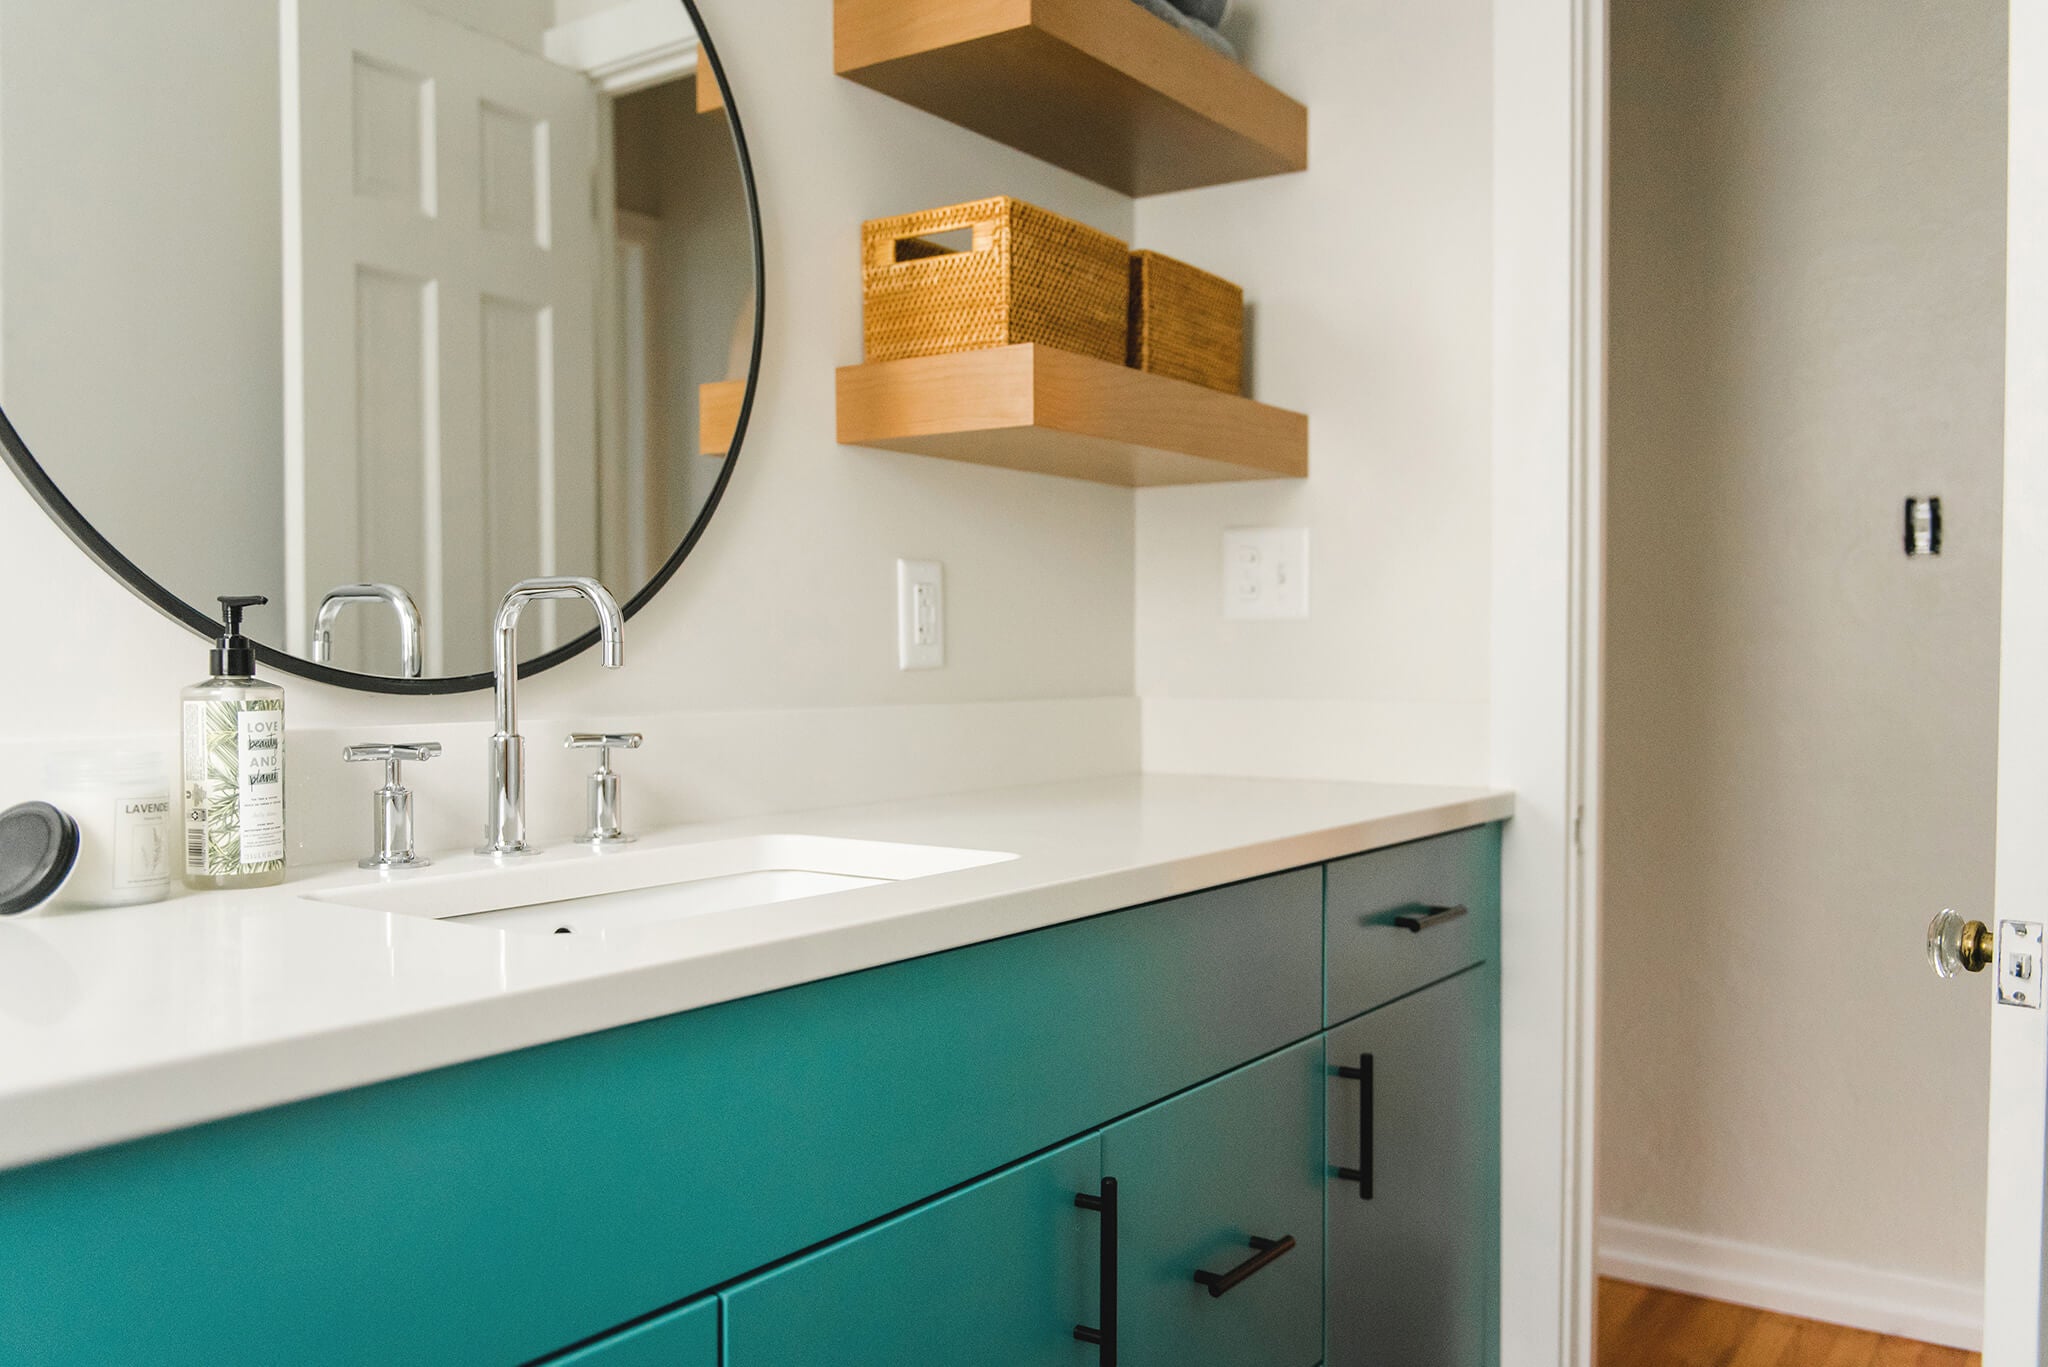 Teal mid-century modern bathroom vanity with white countertops and custom floating shelves